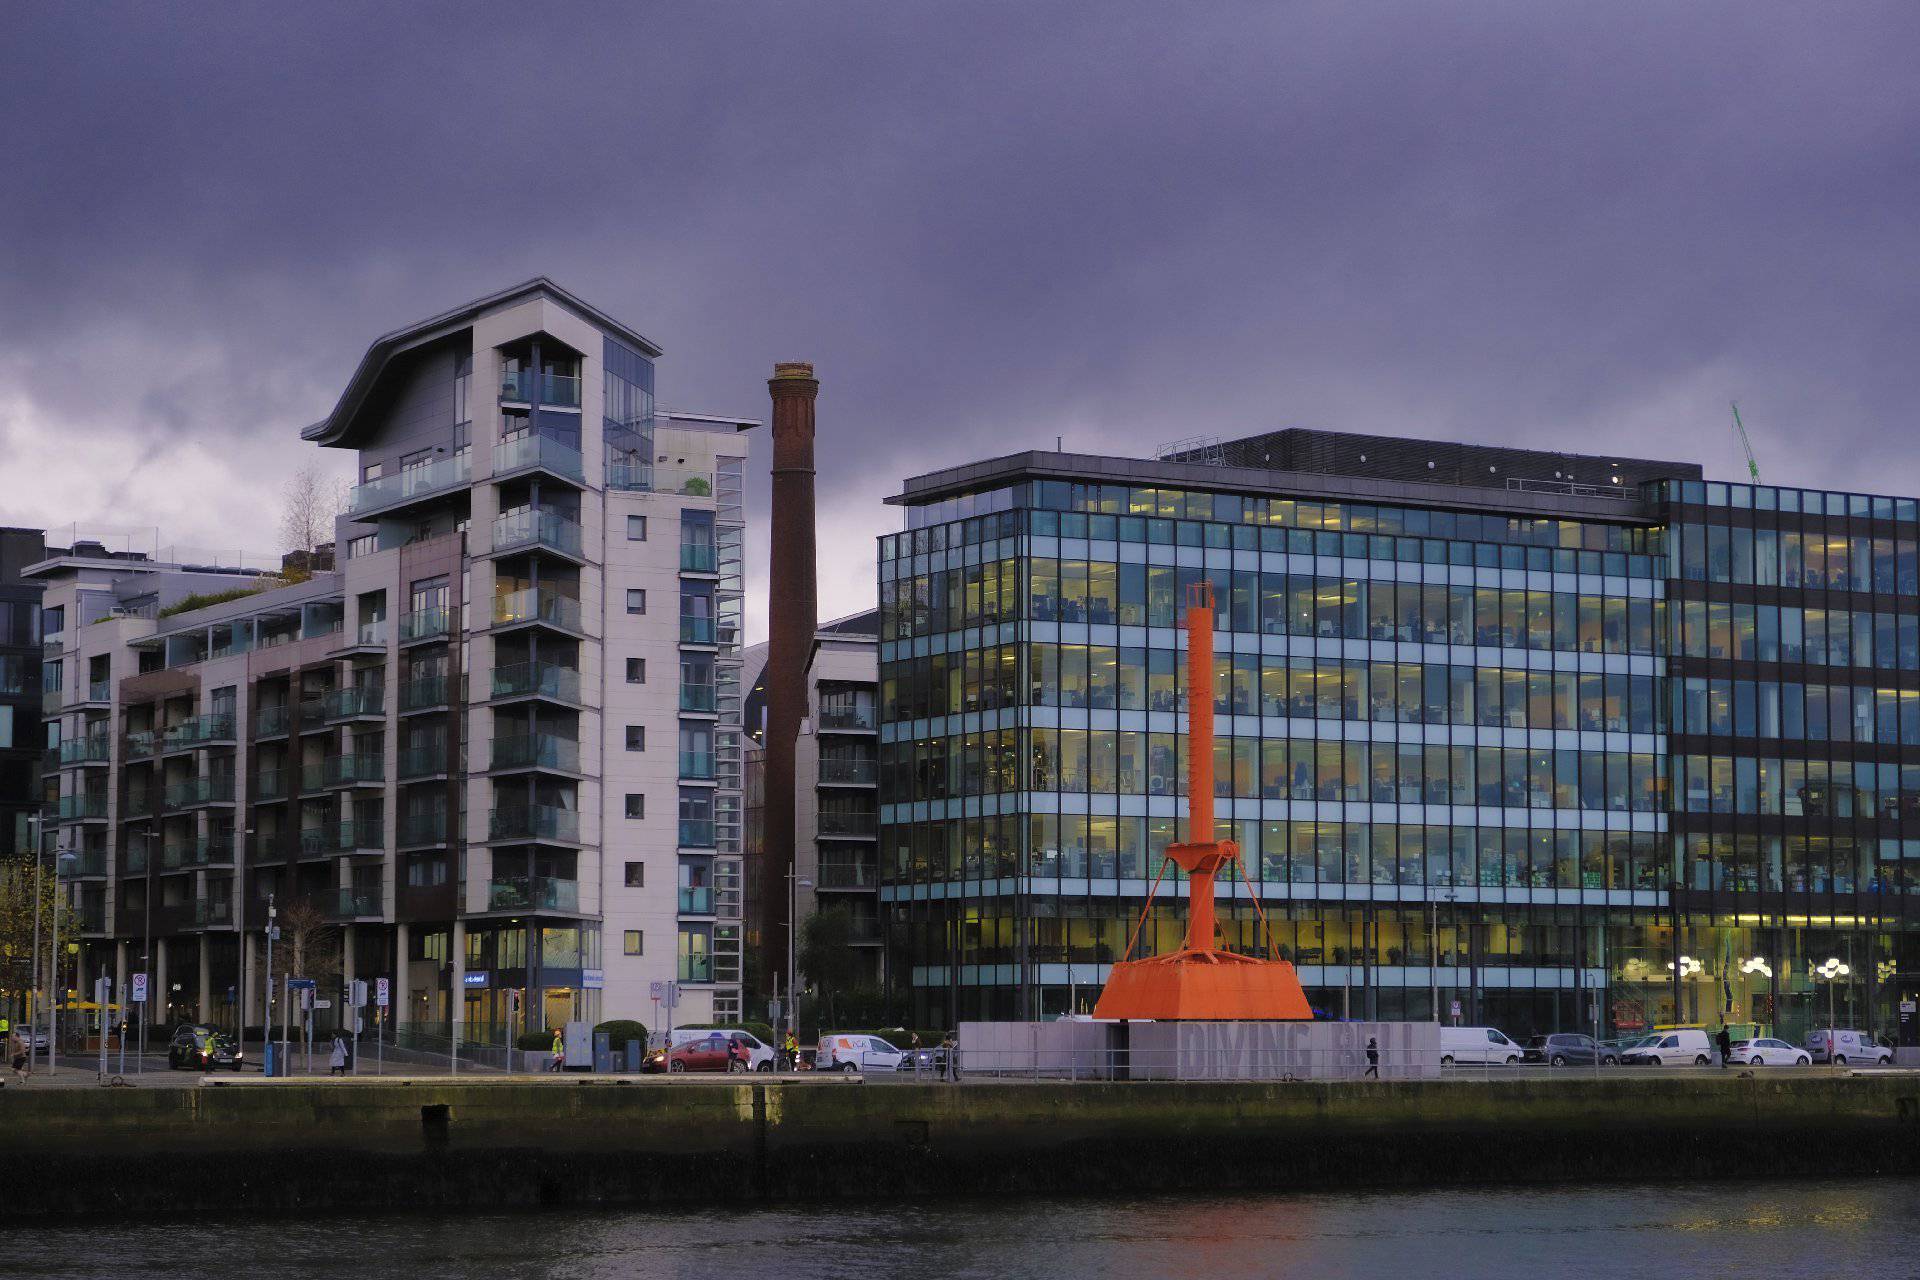 The Diving Bell across Liffey